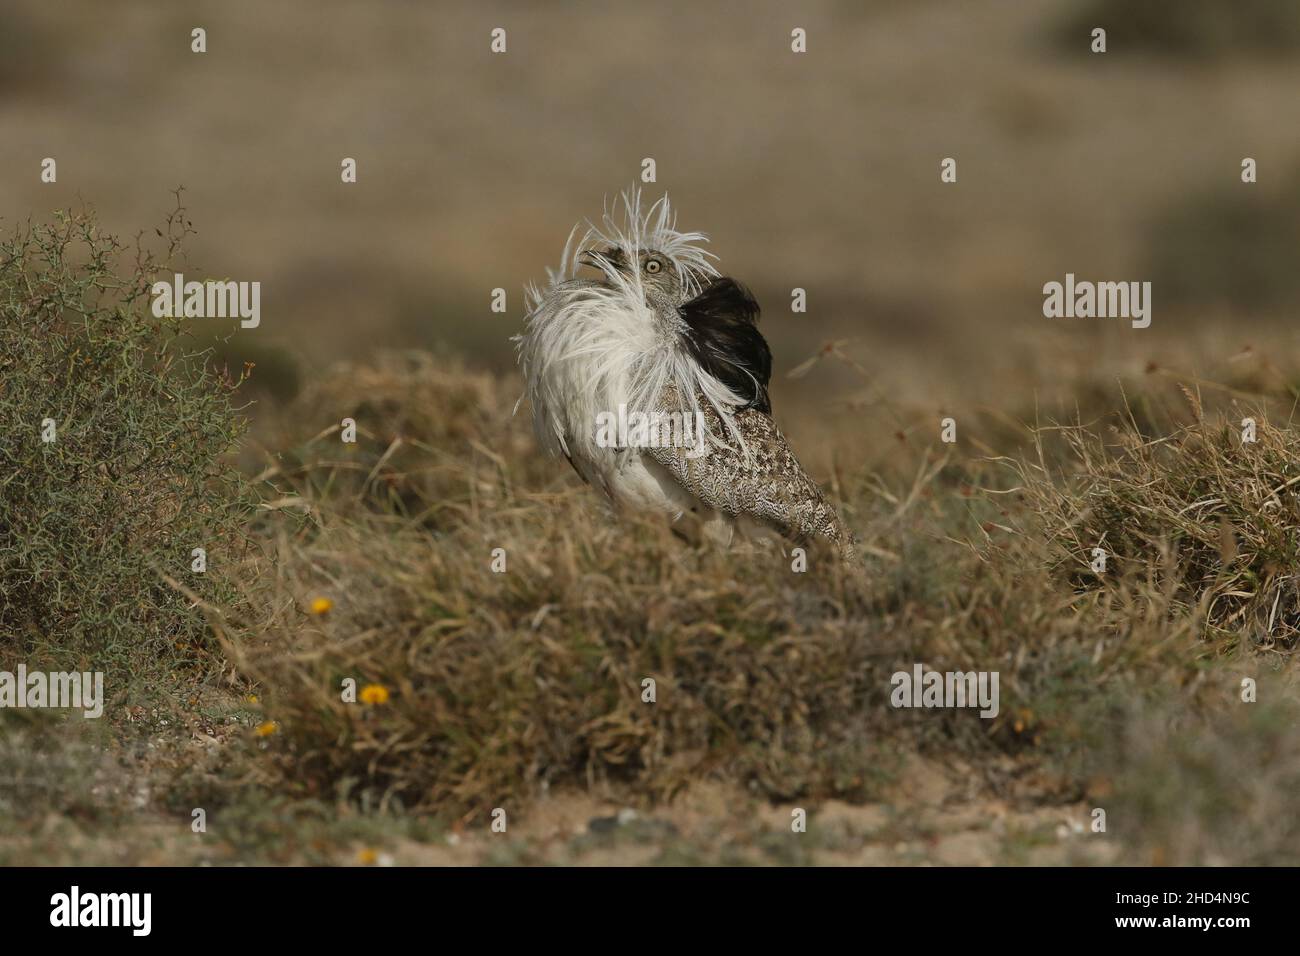 Houbara bustard on the plains of Lanzarote where they are protected by the Islands law enforcement.  On the islands they appear to be stable in number. Stock Photo